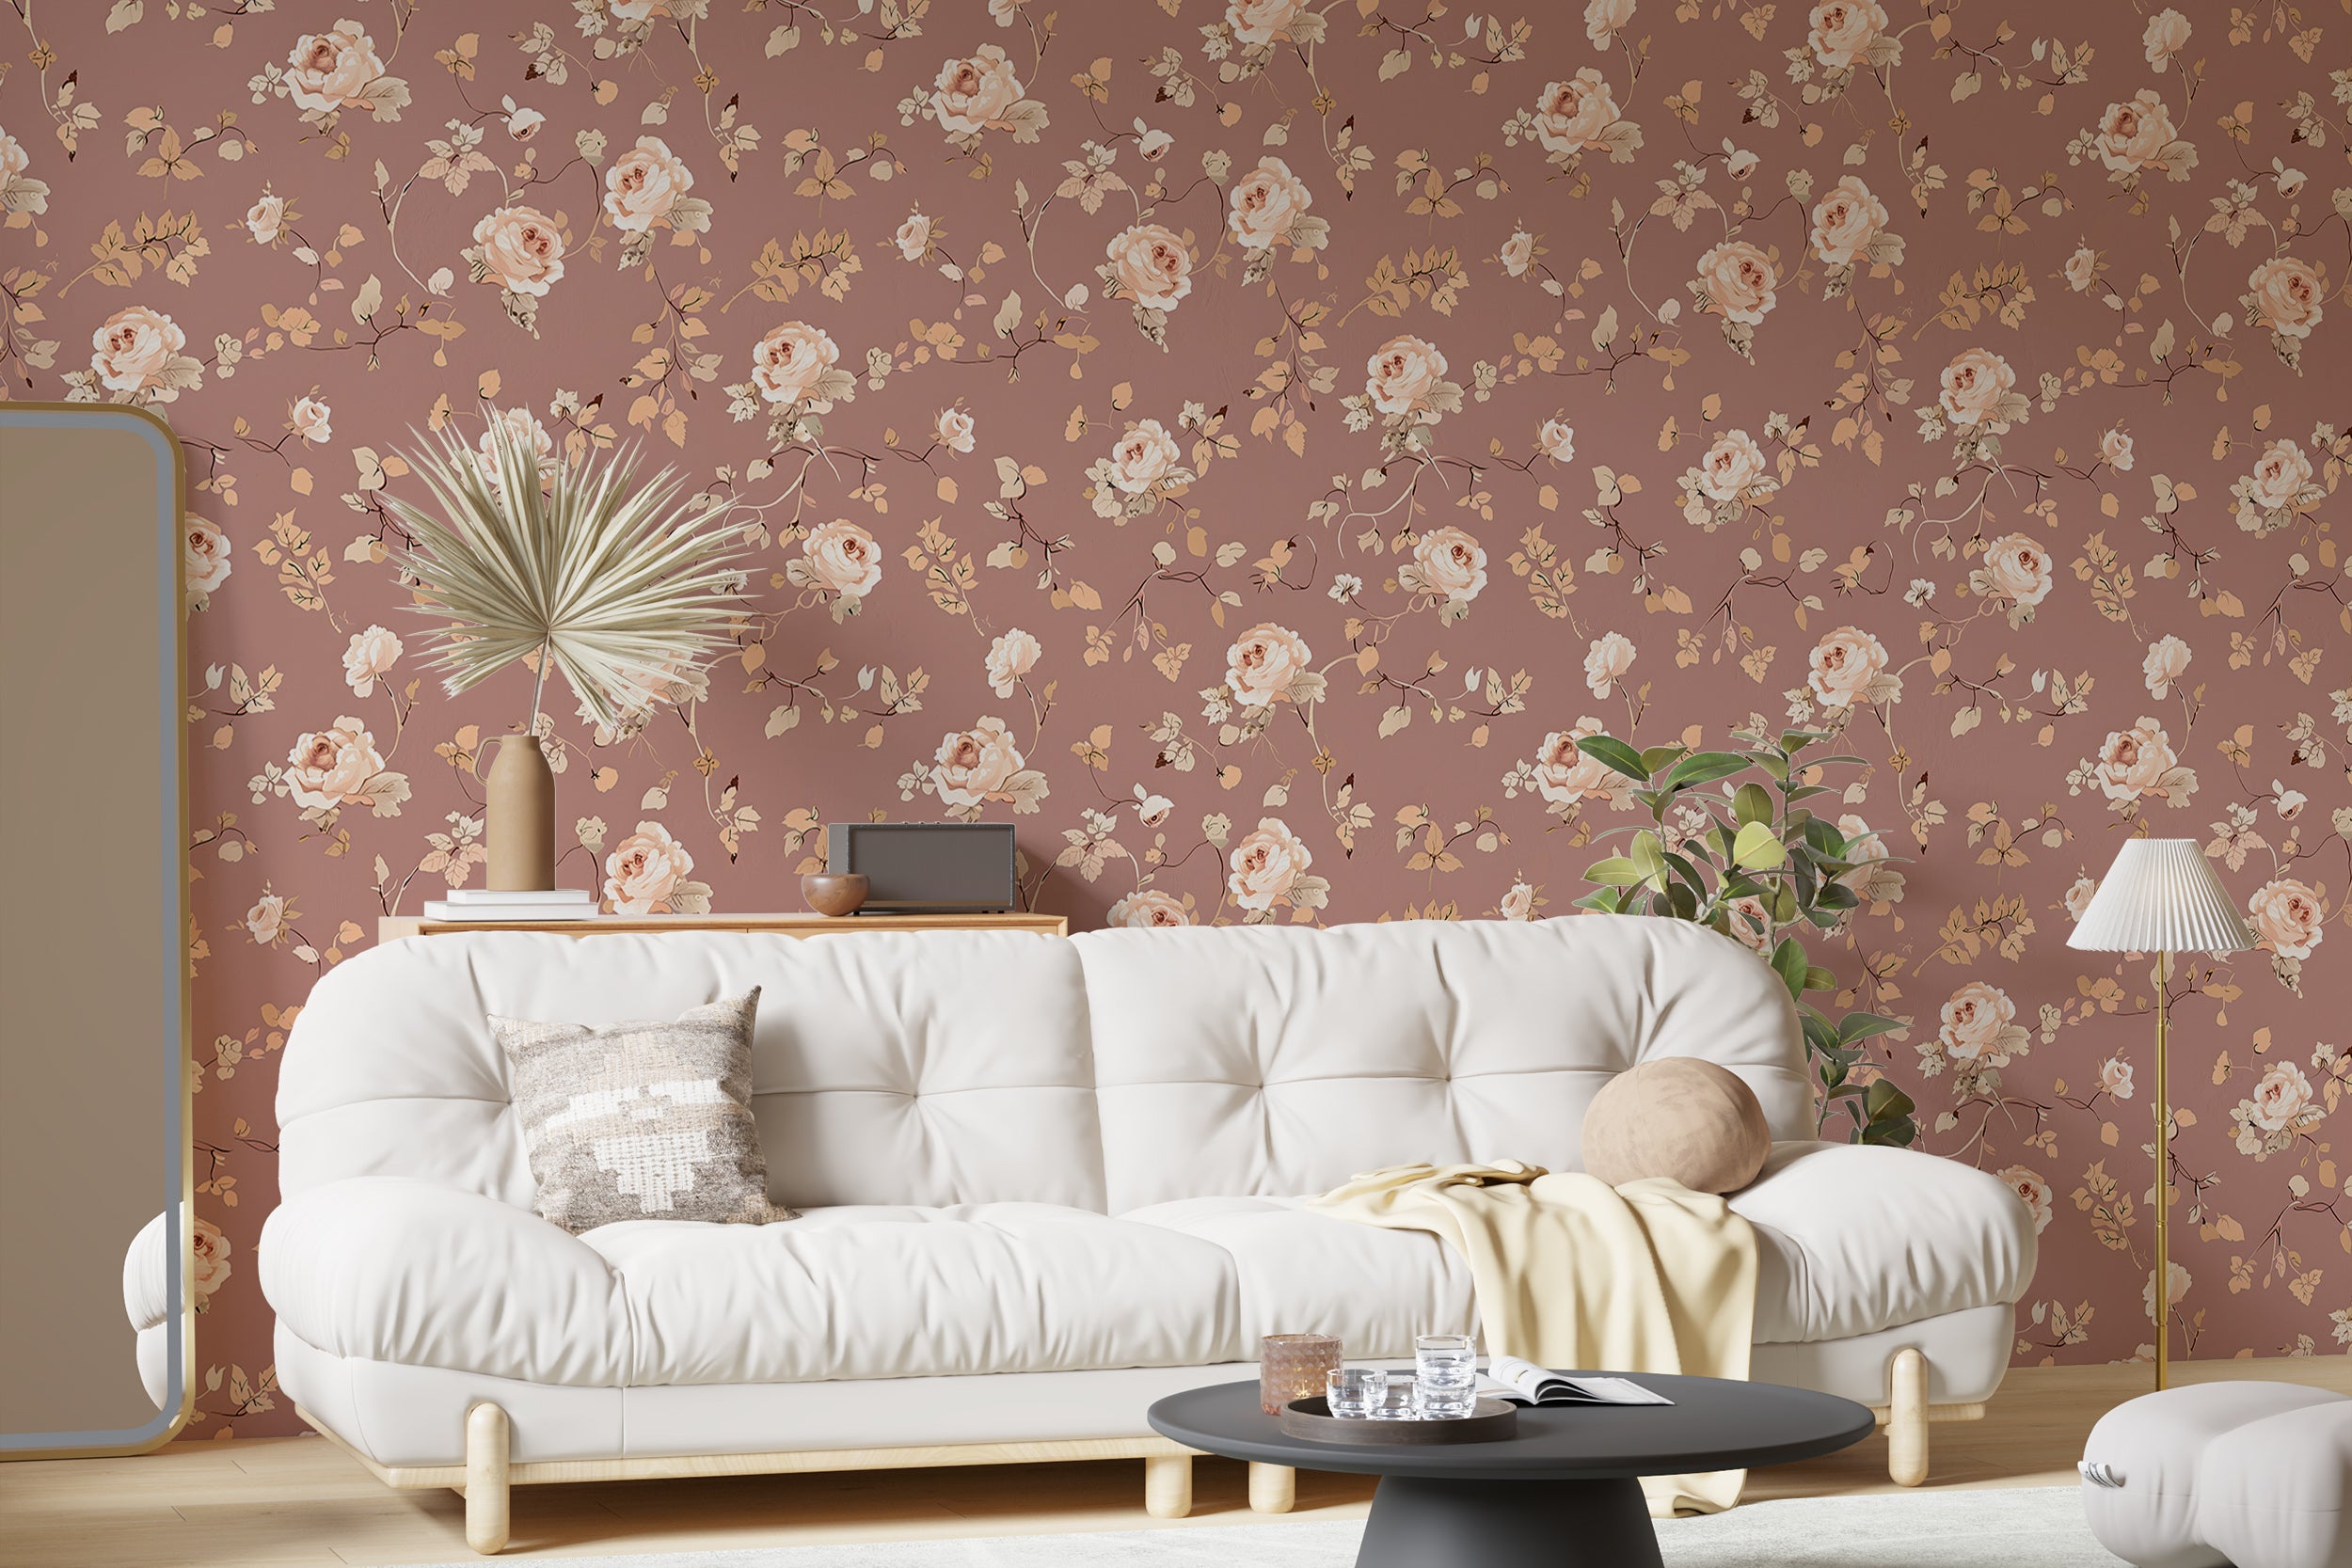 Dusty rose removable wallpaper